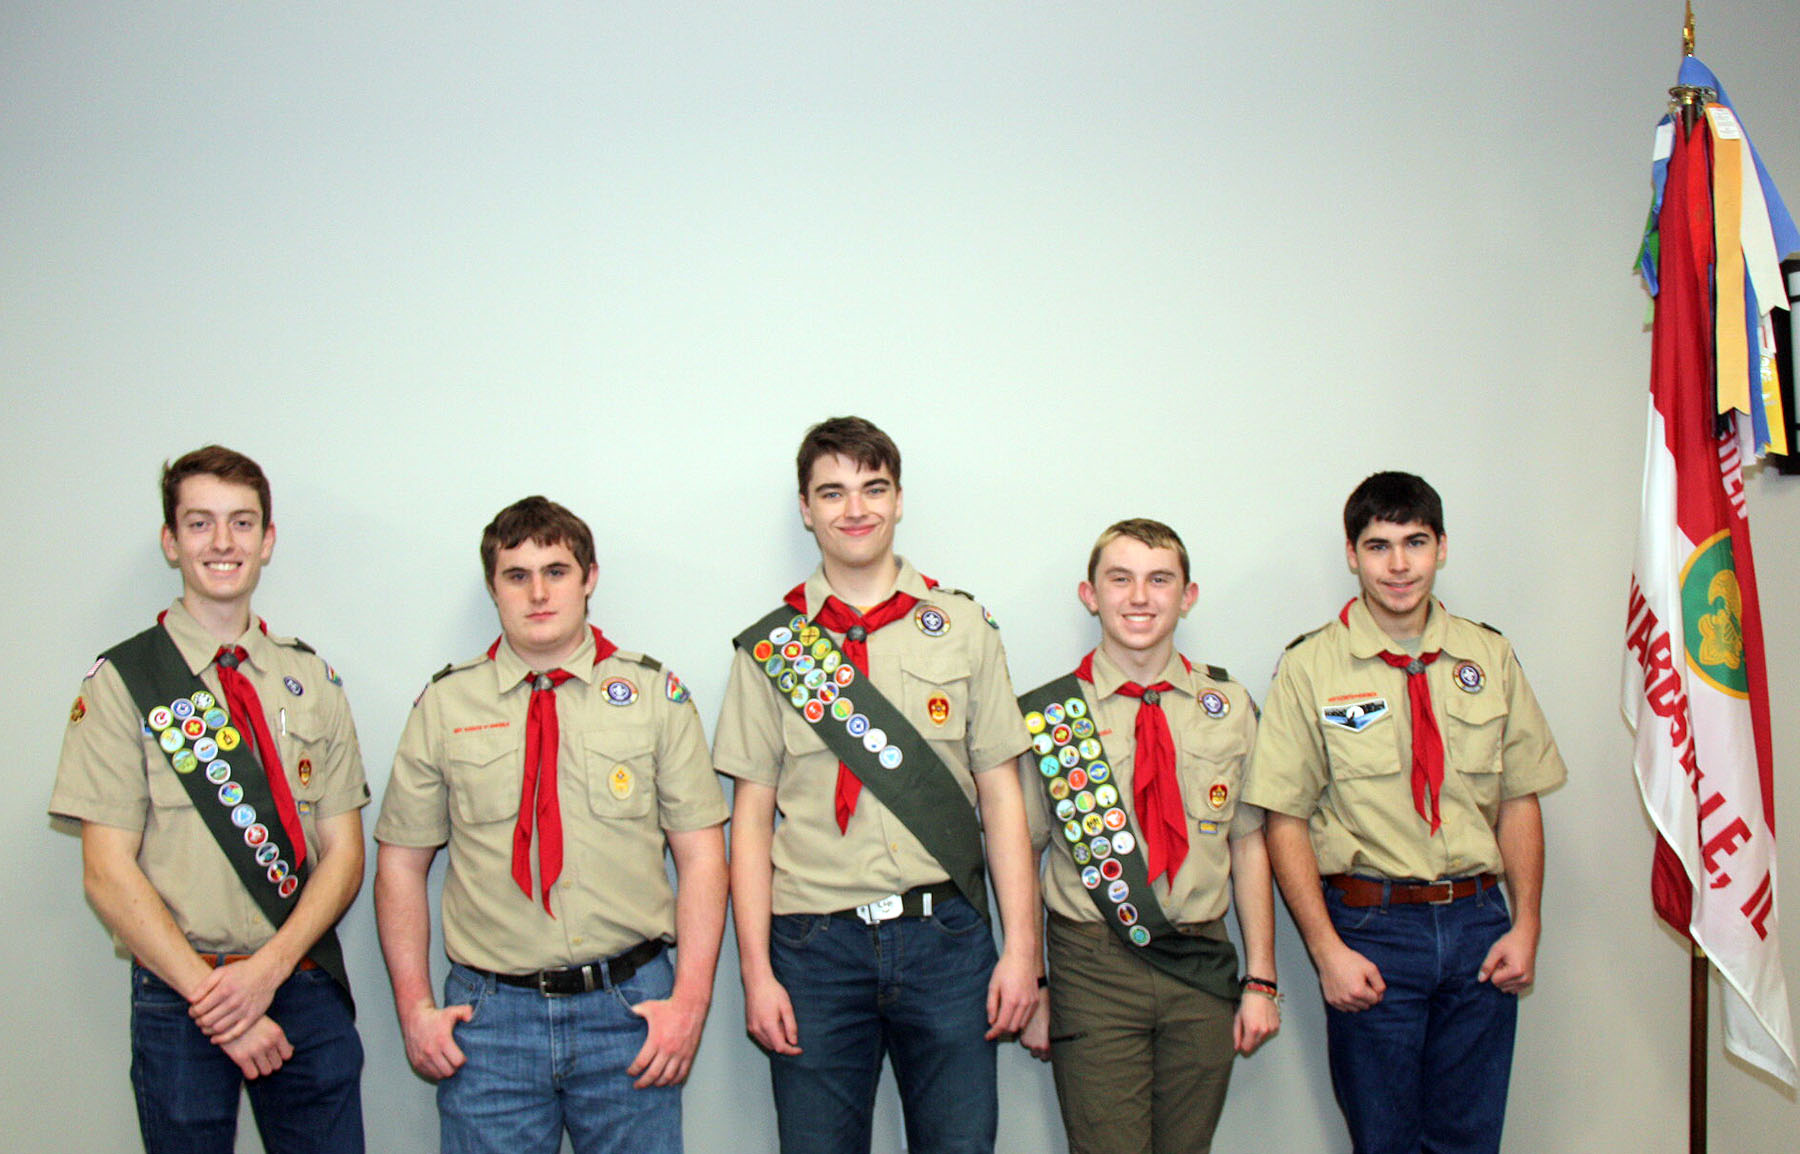 Five young men attained Eagle Scout badges Monday in Edwardsville